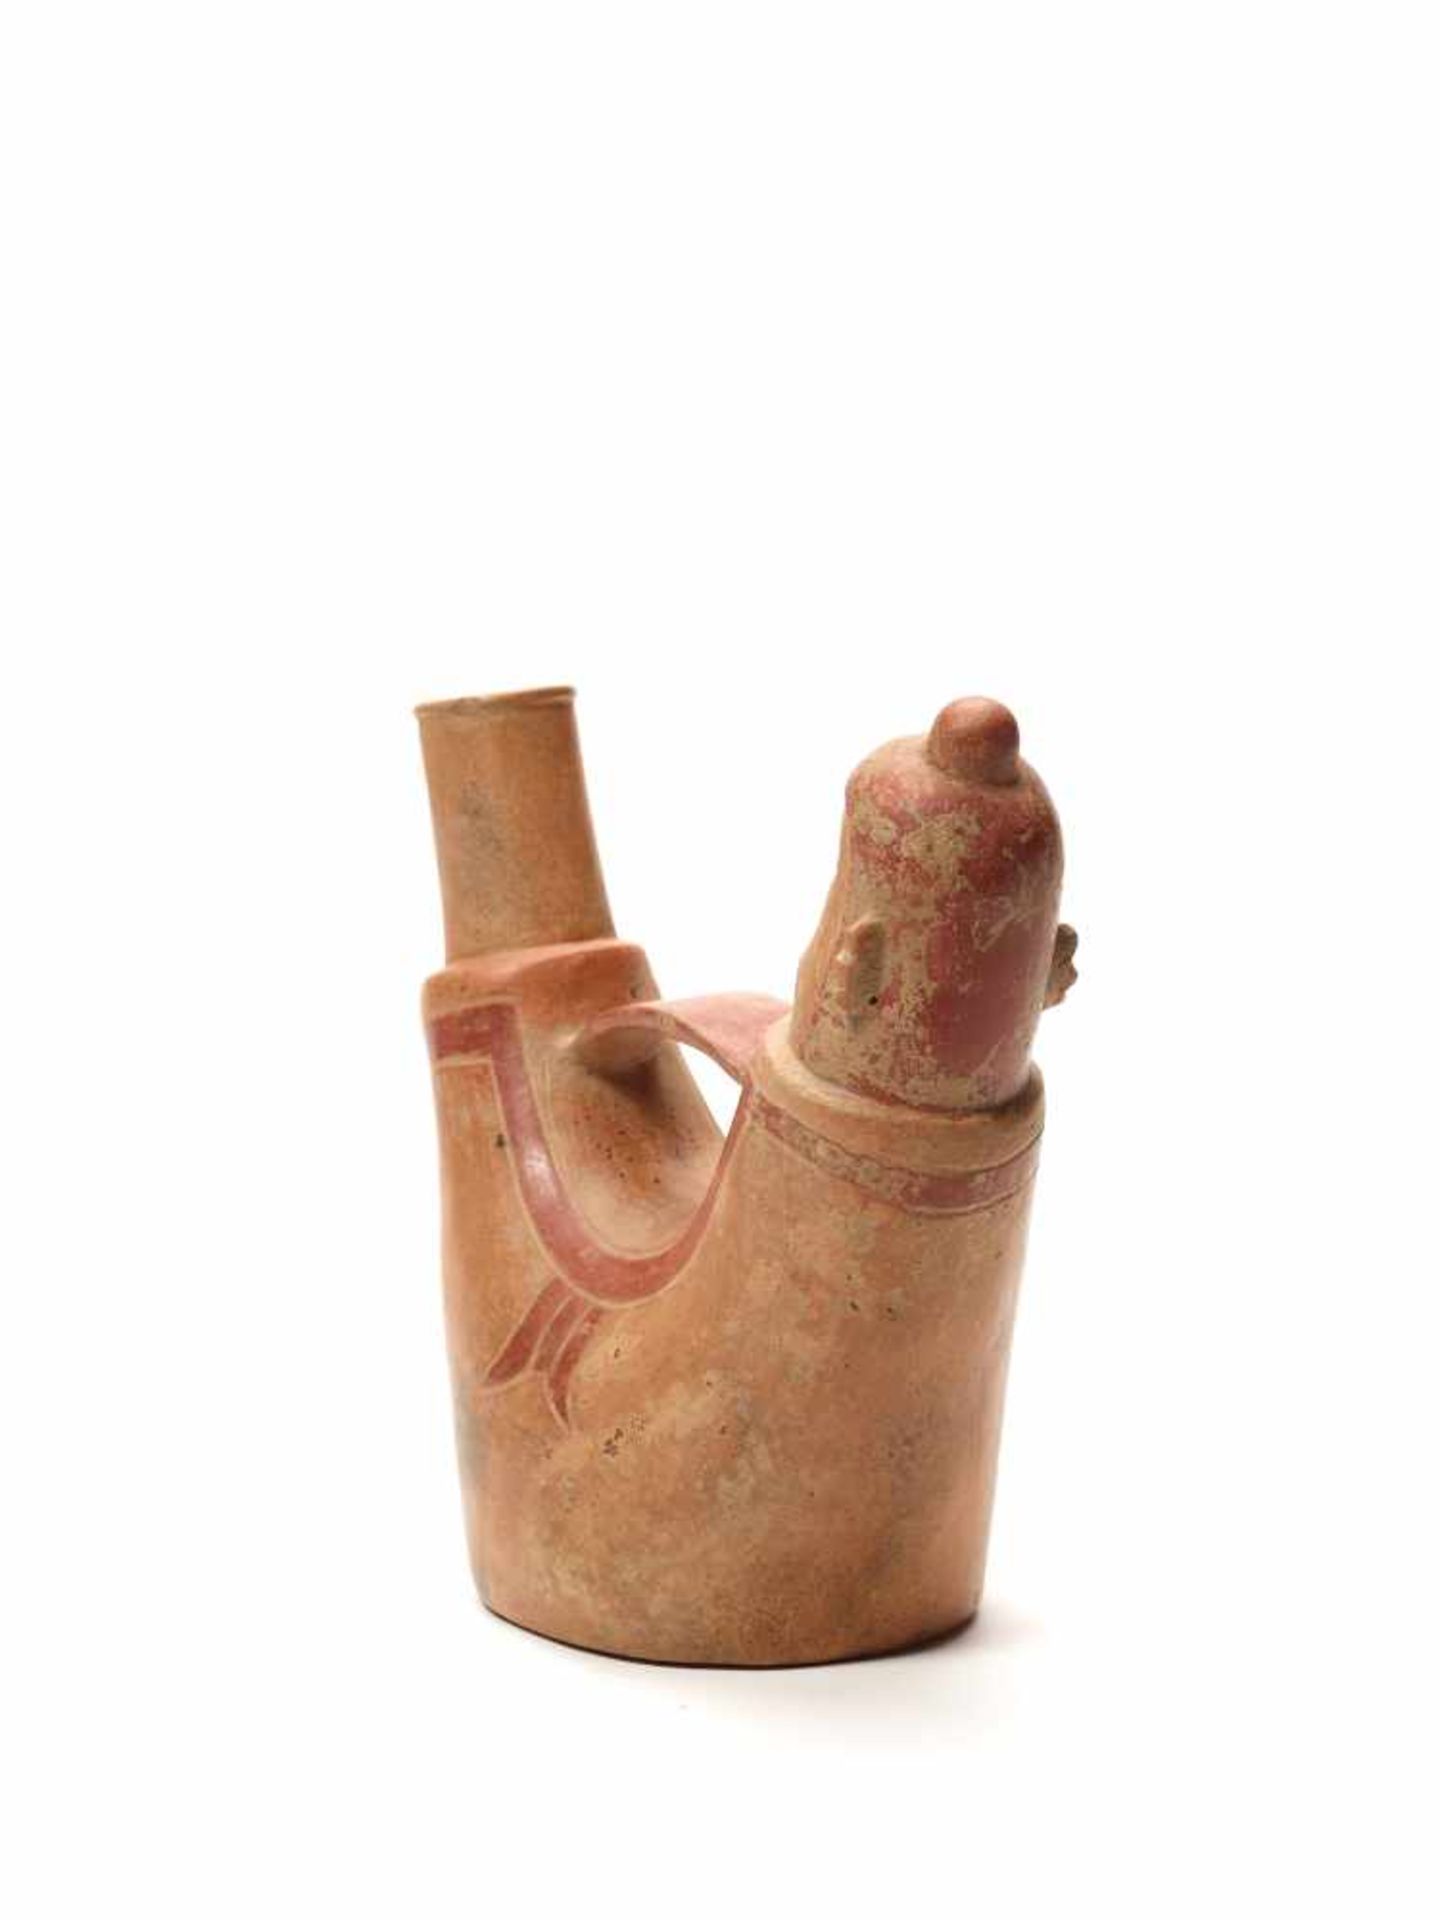 TL-TESTED U-SHAPED VESSEL - CHAVIN CULTURE, PERU, C. 5TH CENTURY BCFired clay with red color - Image 3 of 3